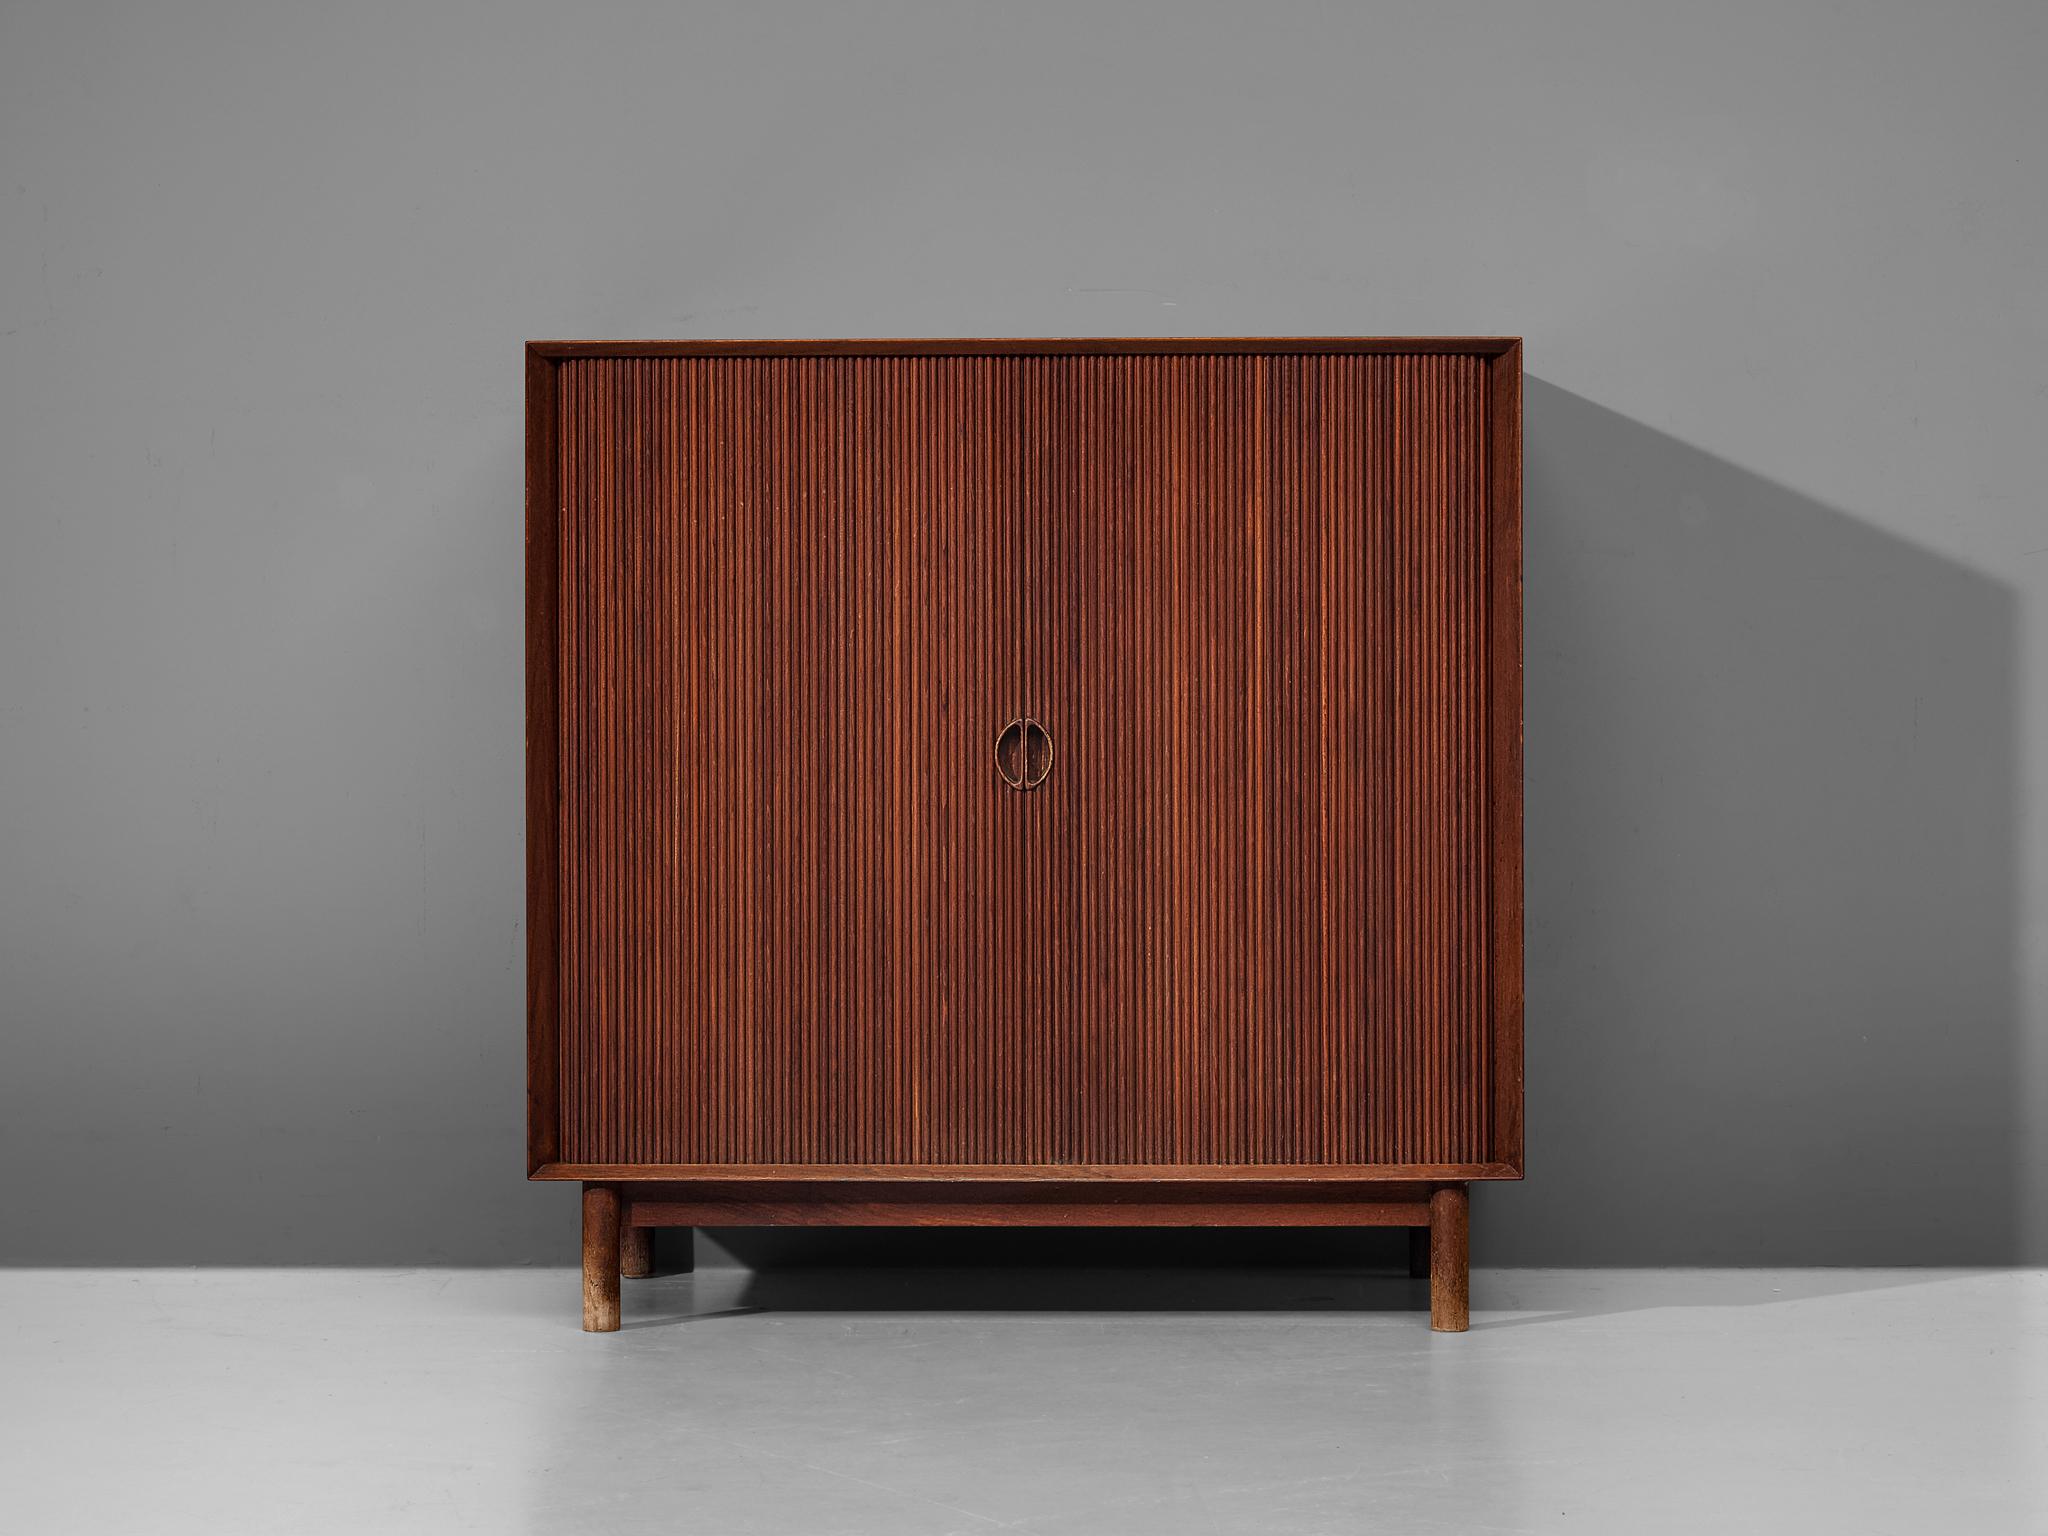 Peter Hvidt & Orla Mølgaard-Nielsen for Søborg Møbelfabrik, cabinet, teak, Denmark, 1950s.

This sideboard executed in solid teak is a design by the Danish designers Peter Hvidt and Orla Mølgaard-Nielsen. It convinces both visual and functional, as